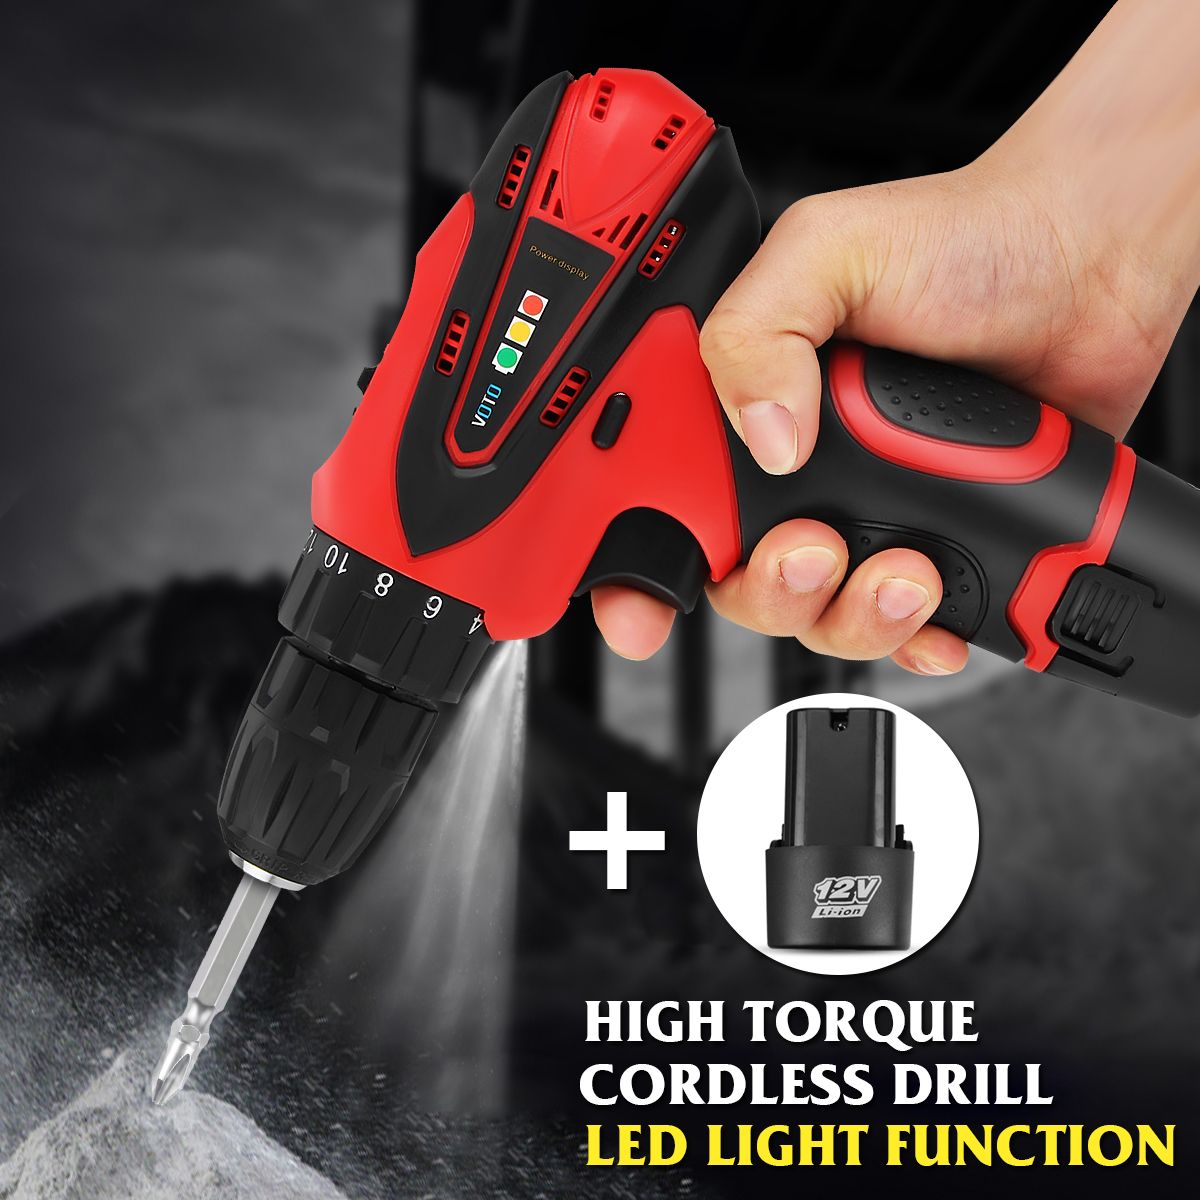 DC-12V-Power-Drills-Two-Speed-Electric-Screwdriver-2-Batteries-1-Charger-Screw-Driver-Tools-Kit-1288364